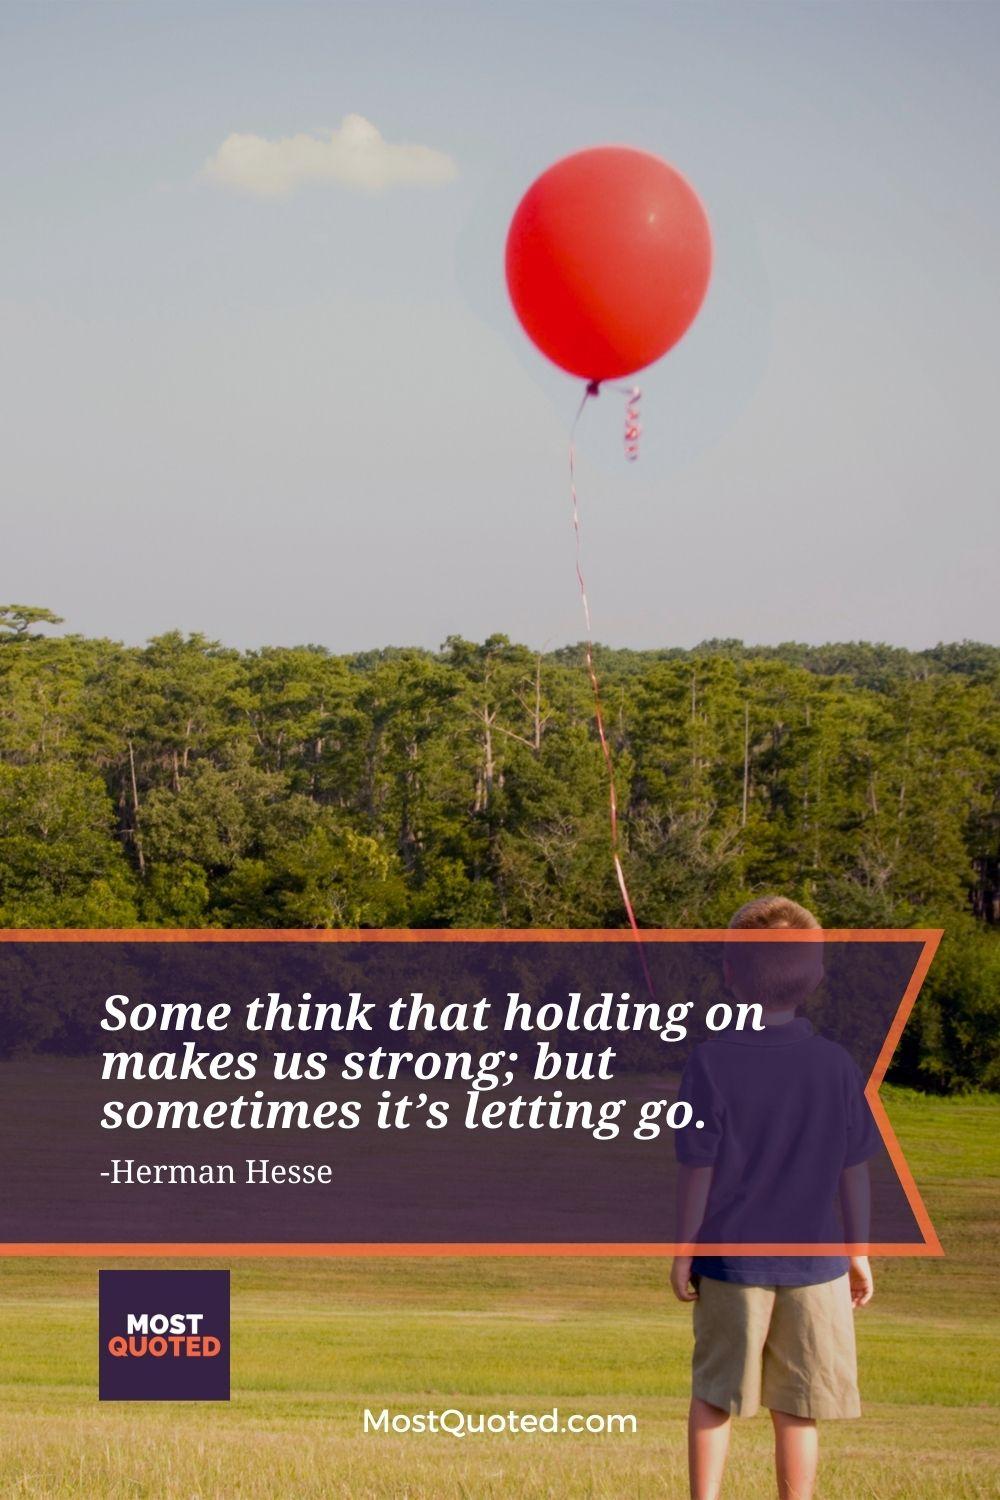 Some think that holding on makes us strong; but sometimes it’s letting go. - Herman Hesse